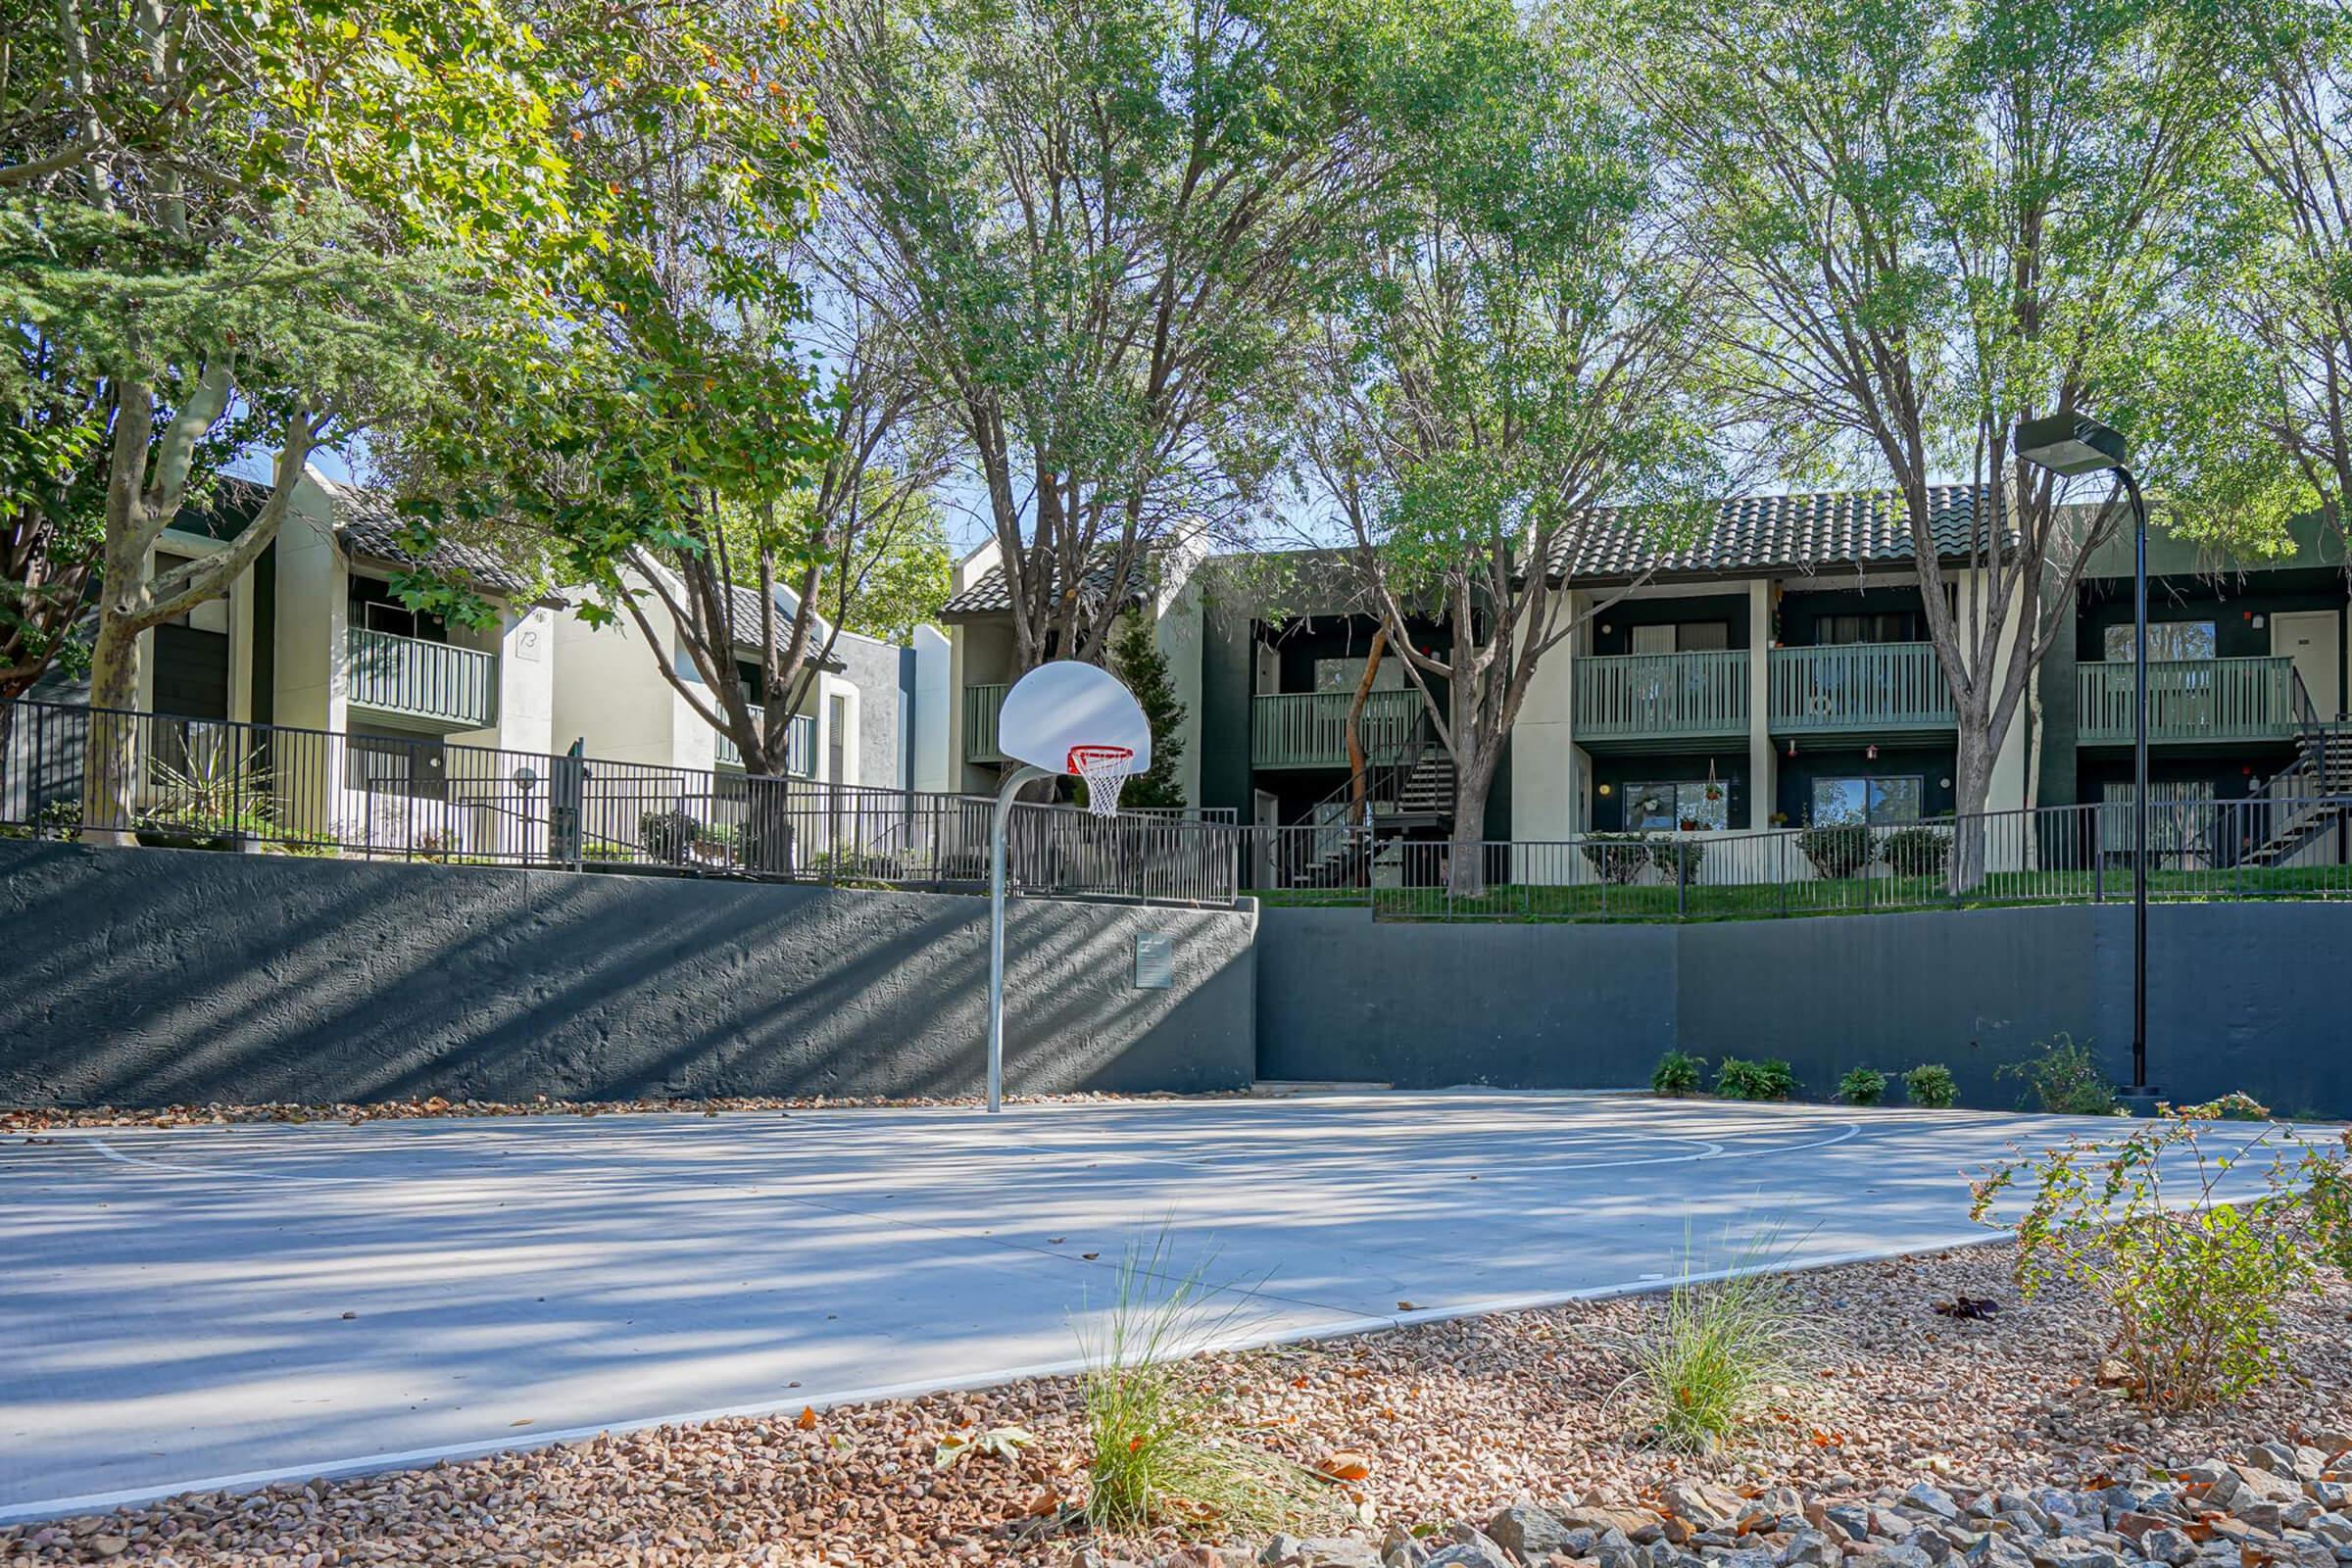 Brand New Sports Court - Treehouse Apartments - Albuquerque - New Mexico